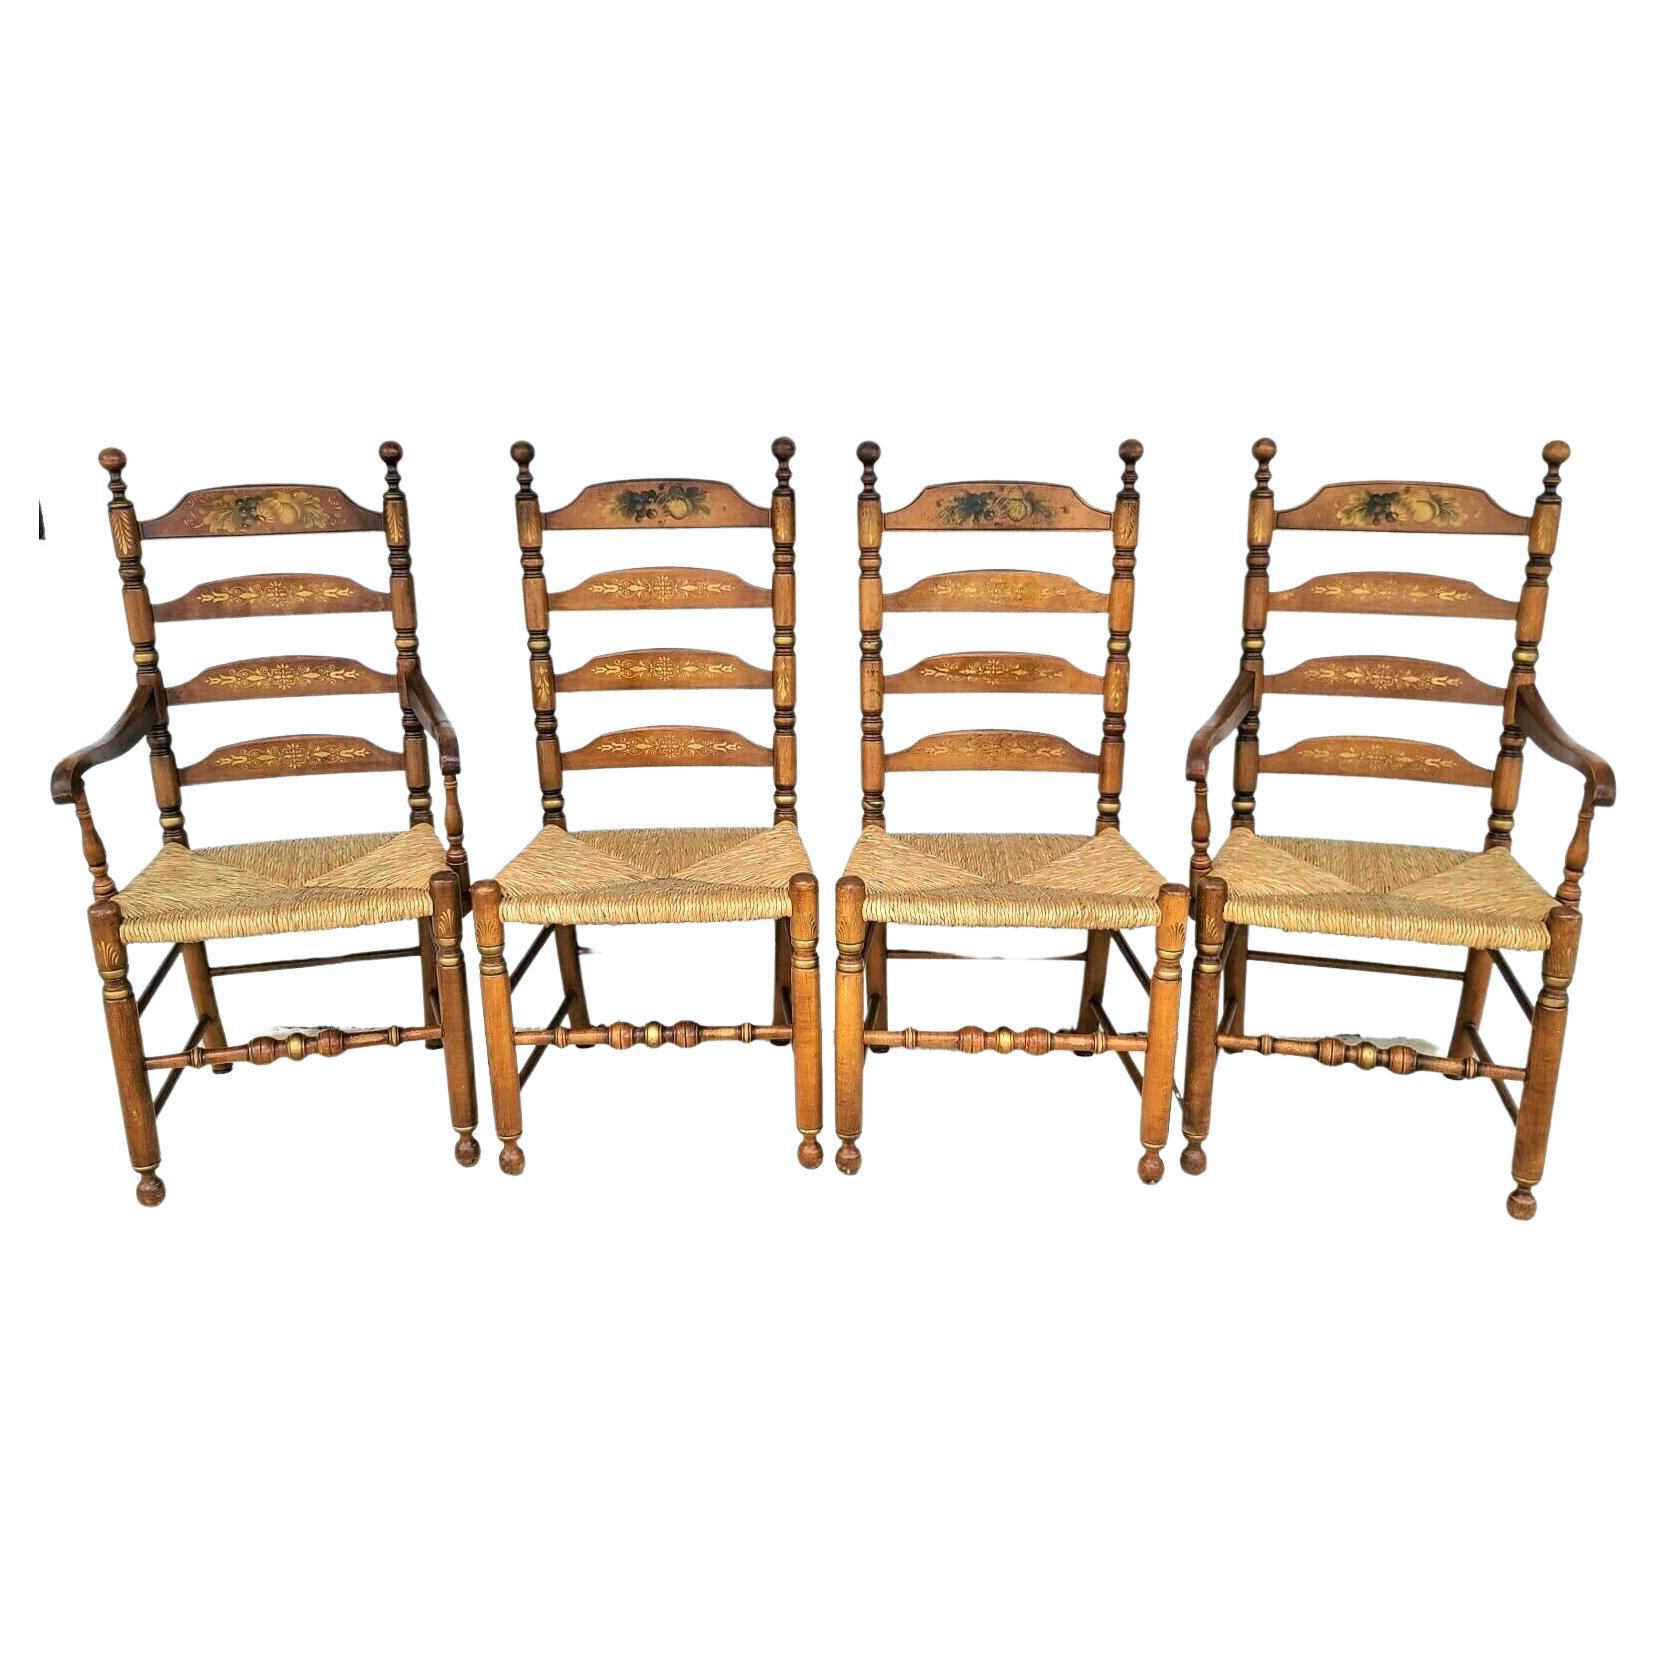 Ladder Back Dining Chairs Harvest Stenciled Rush Seat by L Hitchcock For Sale